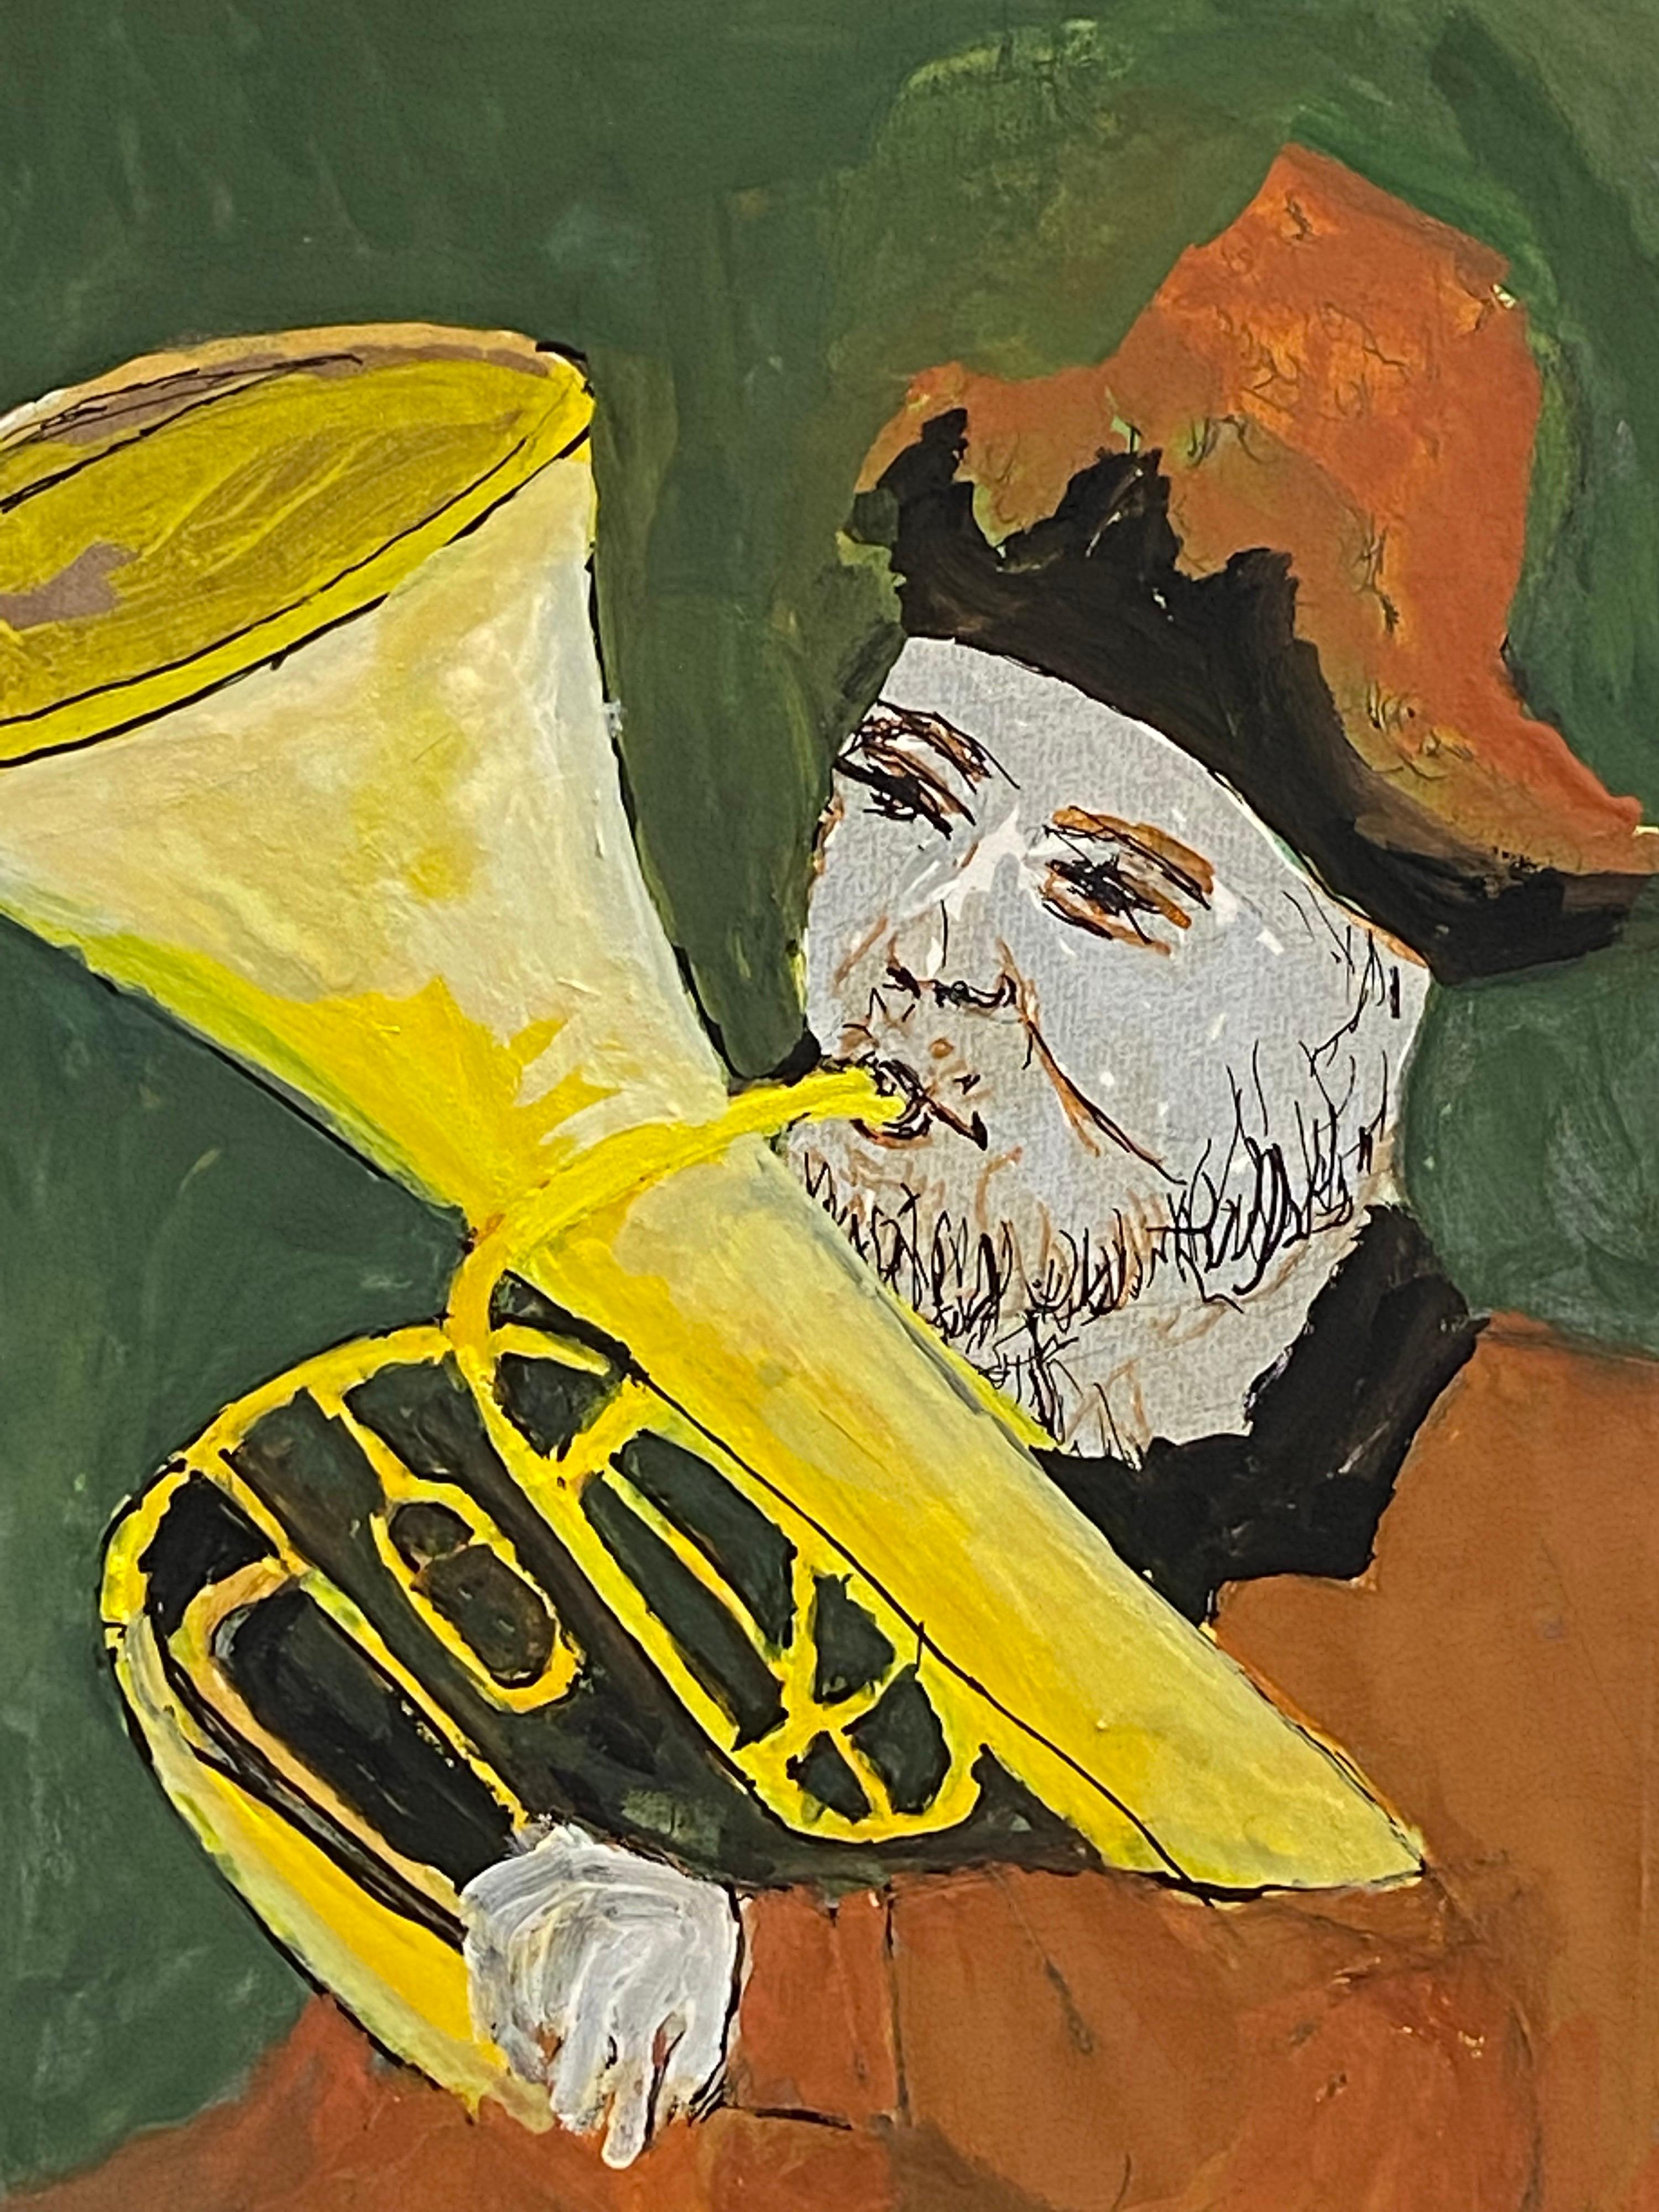 Bernard Labbe Portrait Painting - 1950's French Modernist/ Cubist Painting - Man Playing Tuba 